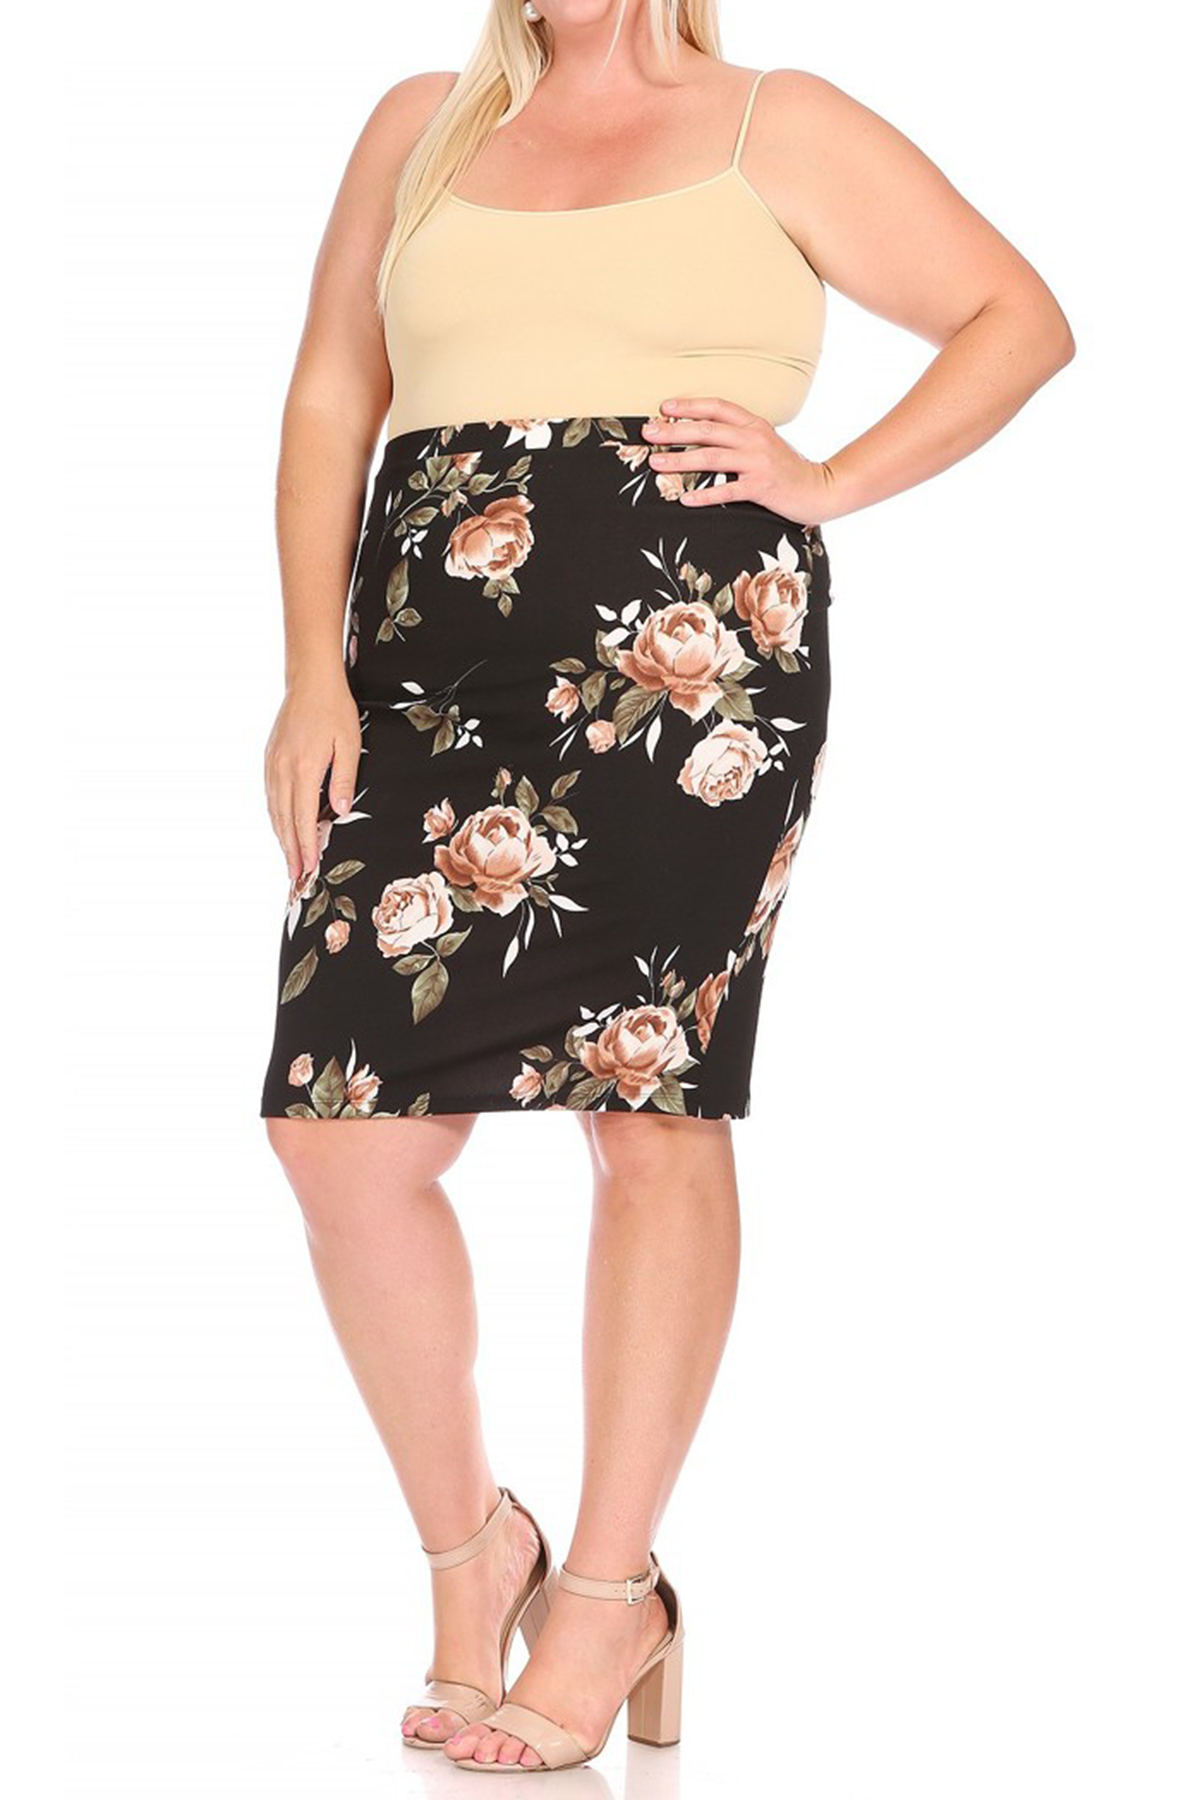 Moa Collection Women's Plus Size Floral Print Knee-Length Fitted Style Pencil Skirt